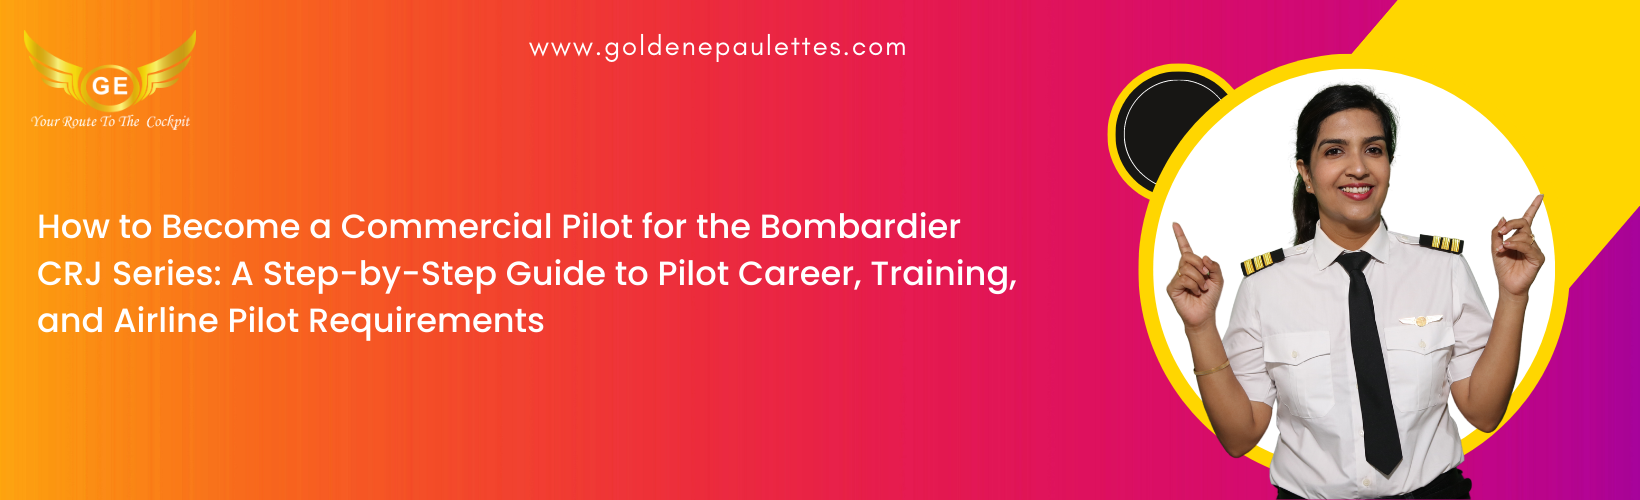 13.How to Become a Commercial Pilot for the Bombardier CRJ Series